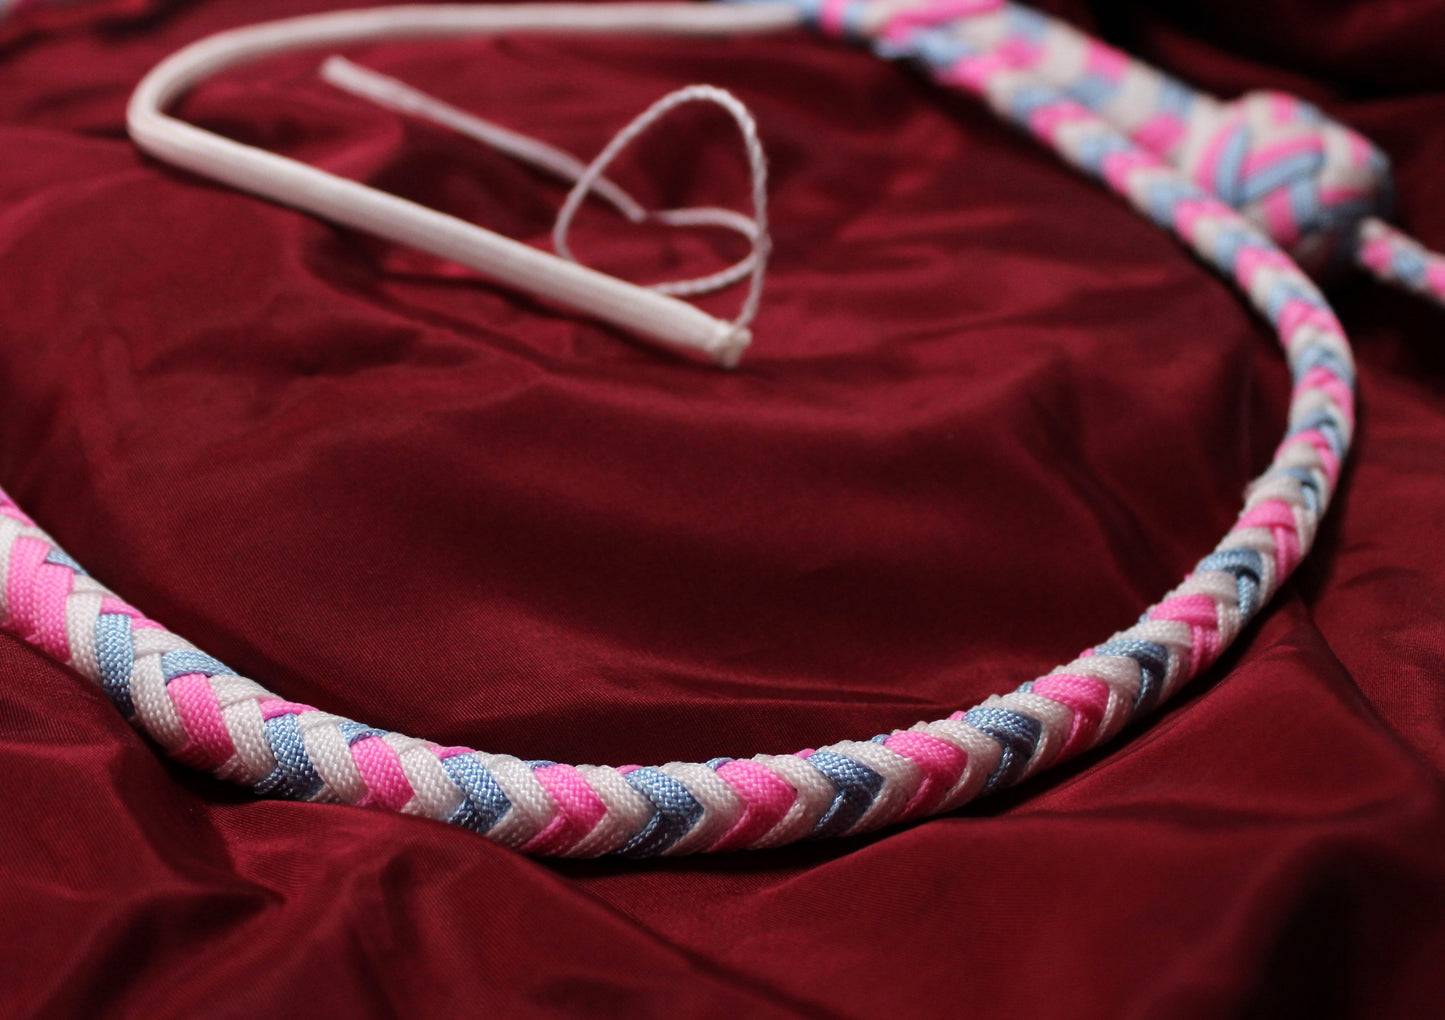 Blue, white, pink paracord whip